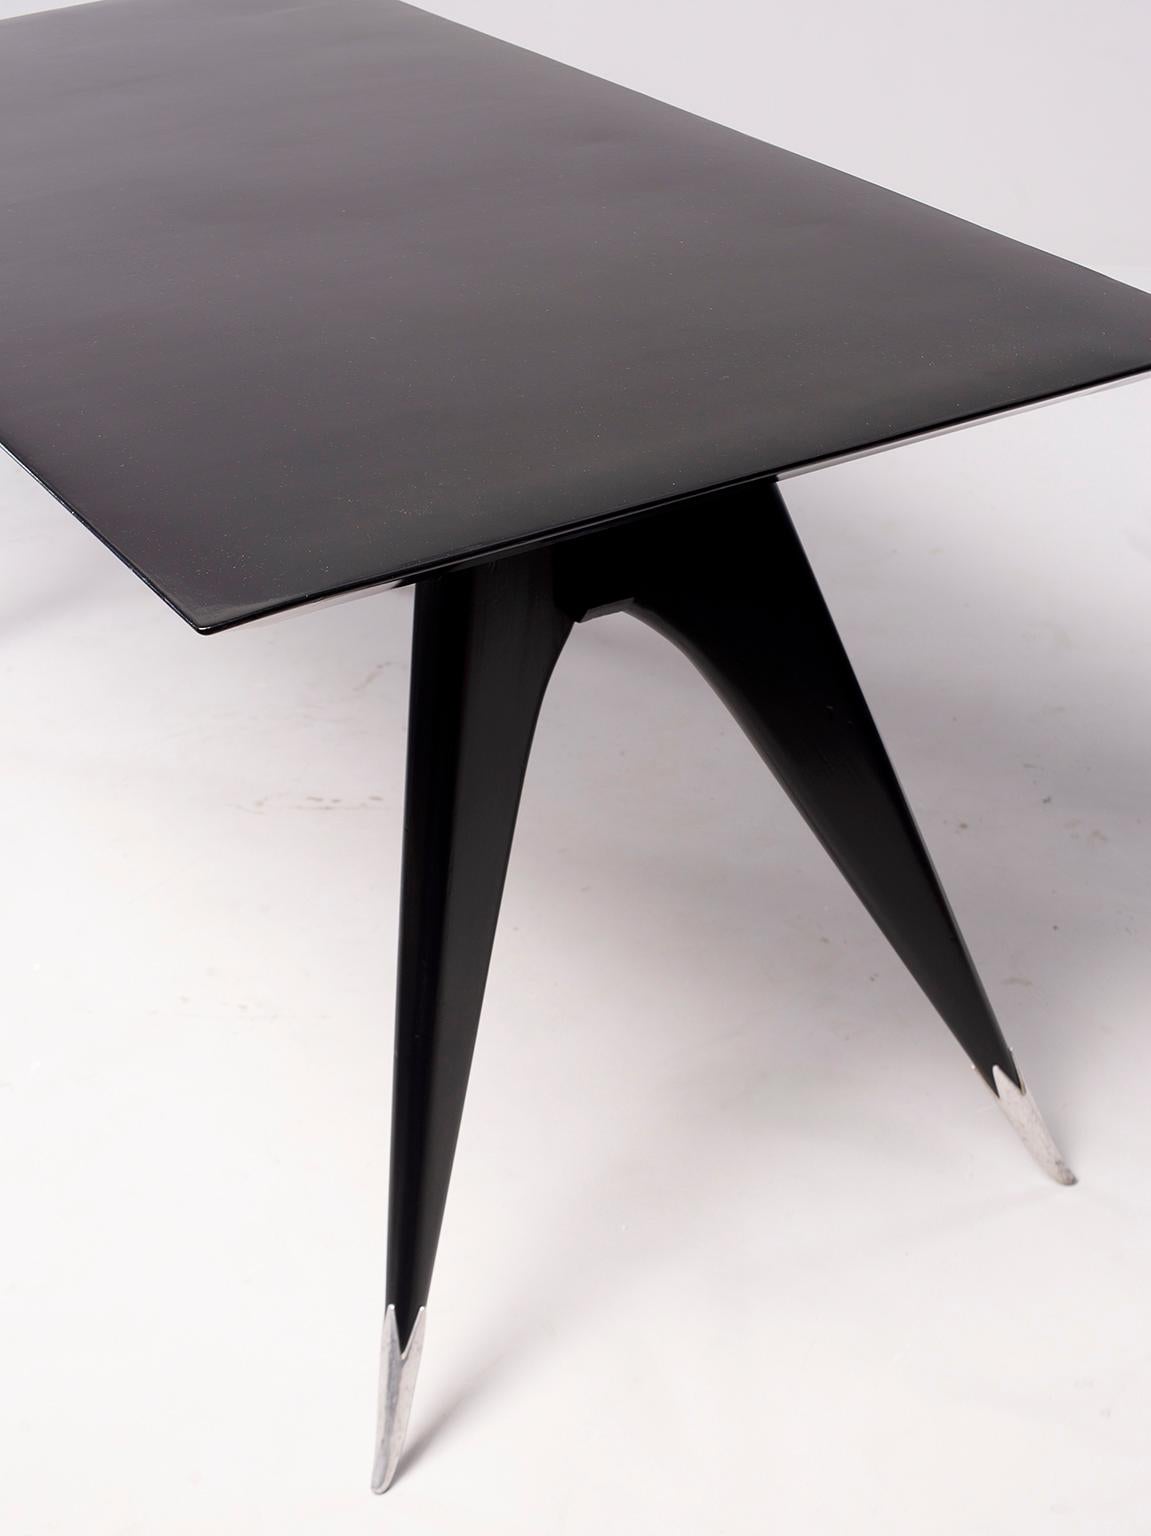 Midcentury Italian Ebonized Dining Table with Tapered Legs and Silver Leg Caps 3